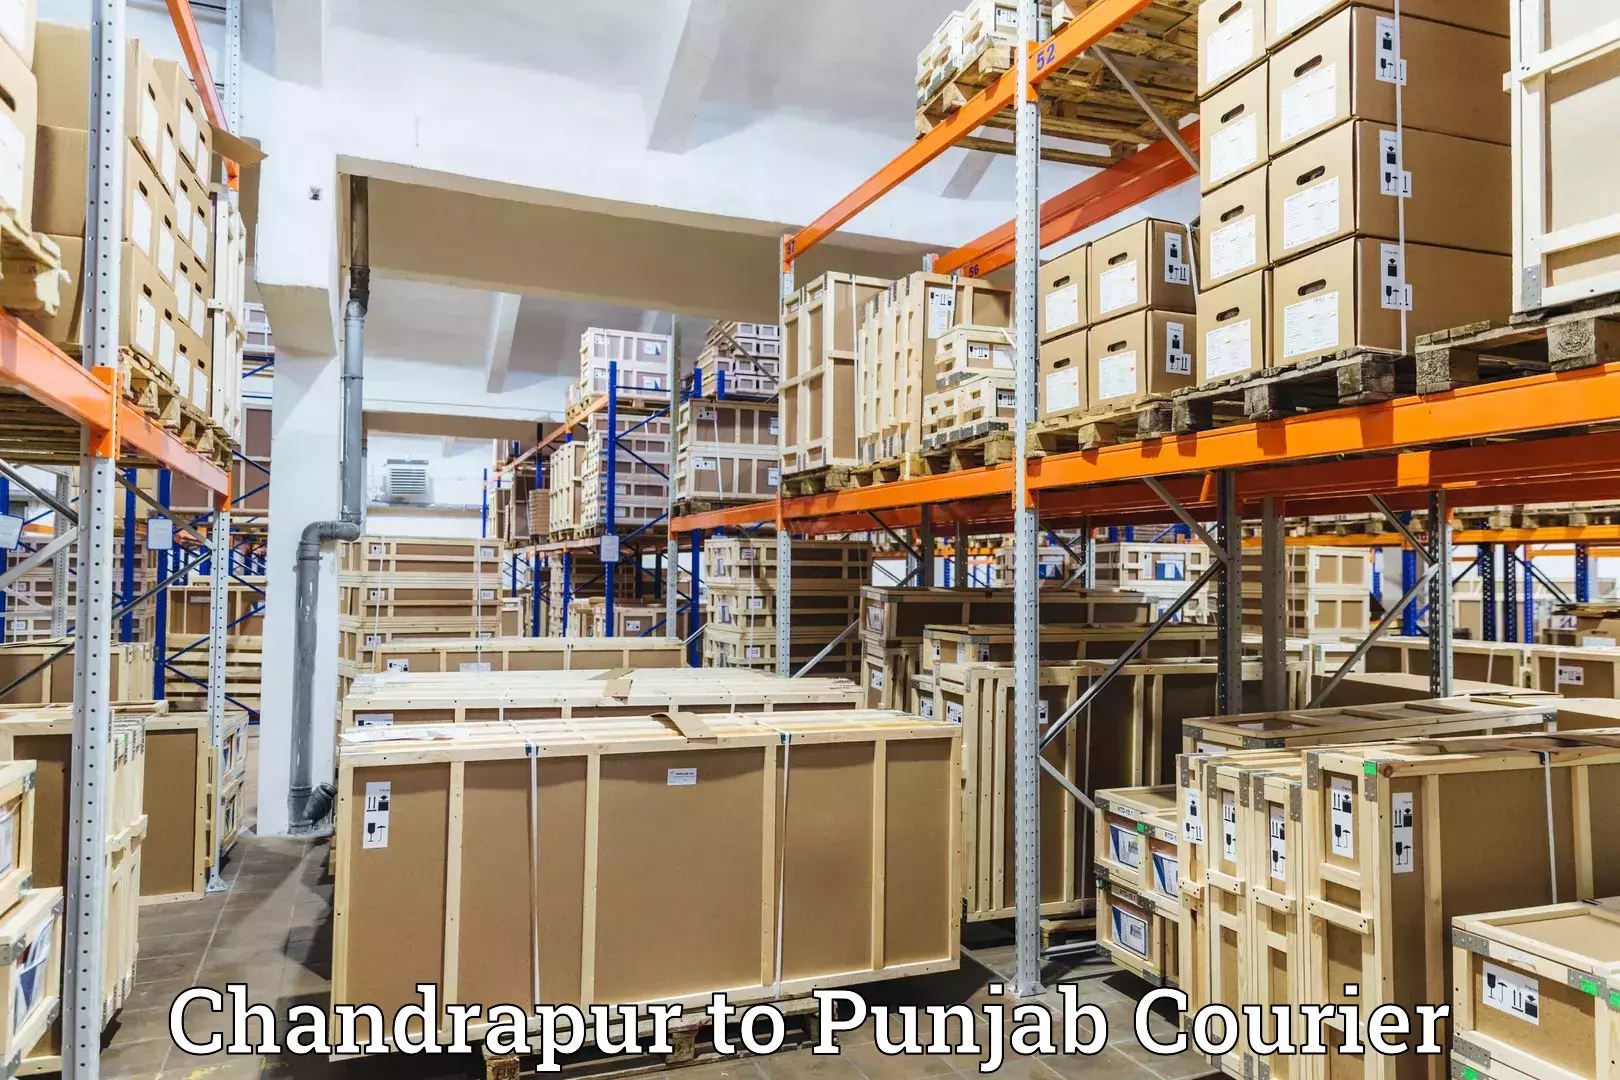 Supply chain efficiency in Chandrapur to Punjab